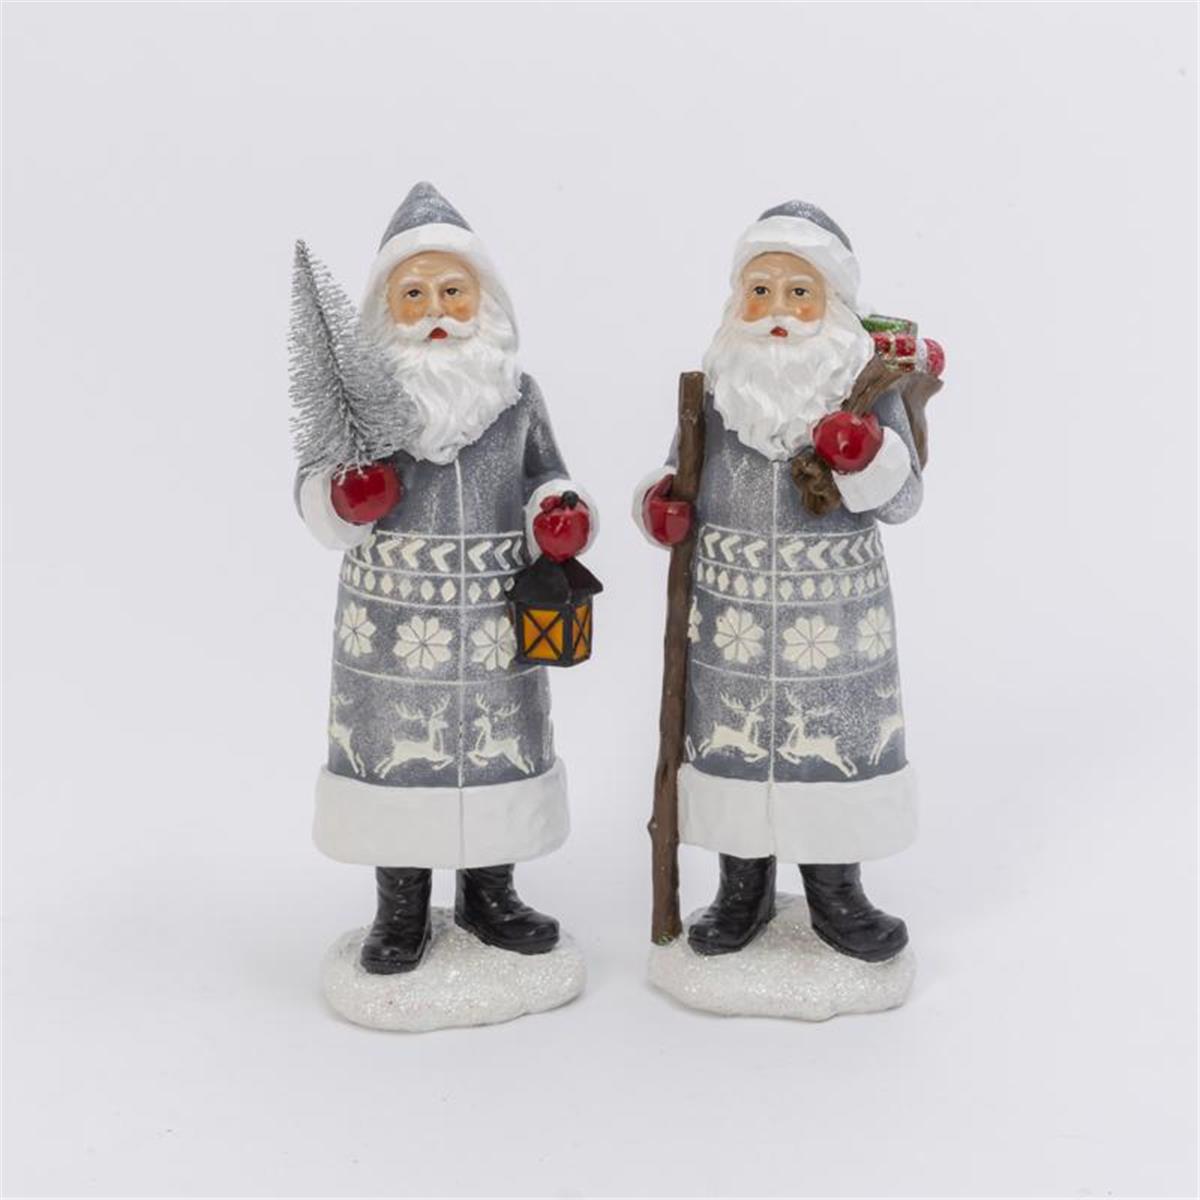 Picture of Gerson 9081070 9.57 x 2.96 x 3.55 in. Figurine Indoor Christmas Decor, Multi Color - Pack of 2